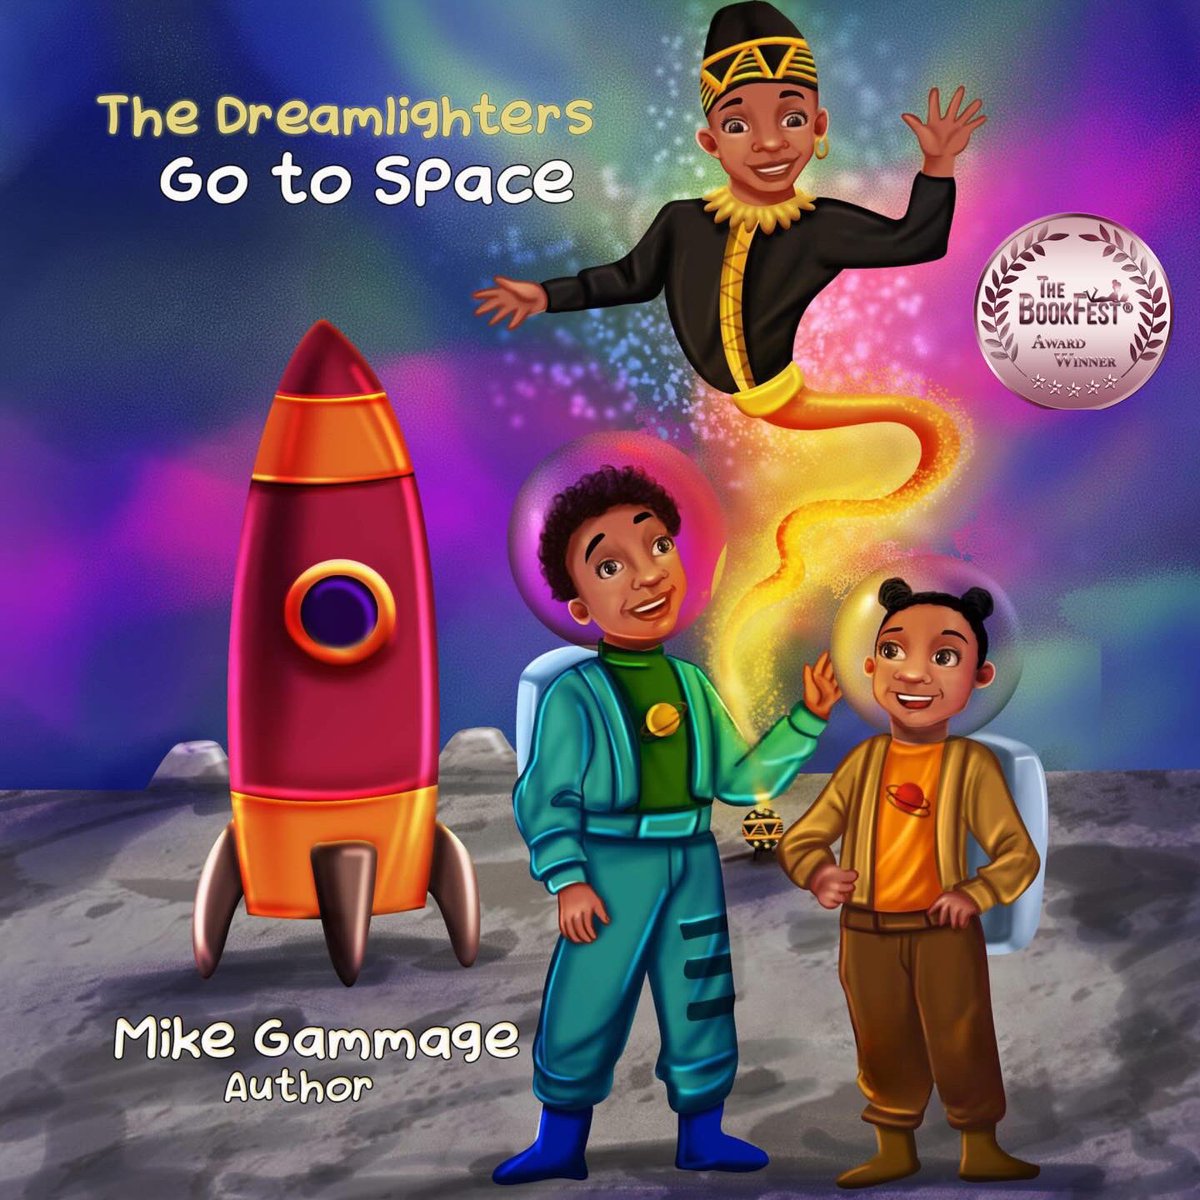 We are grateful to have received another award for our book. Thank you to The BookFest for finding our story worthy.

#AwardWinner #AwardWinning #ChildrensBook #Author #TheBookfest #TheBookfestSpring2024 #TheDreamlightersGotoSpace #MikeWritesforKids